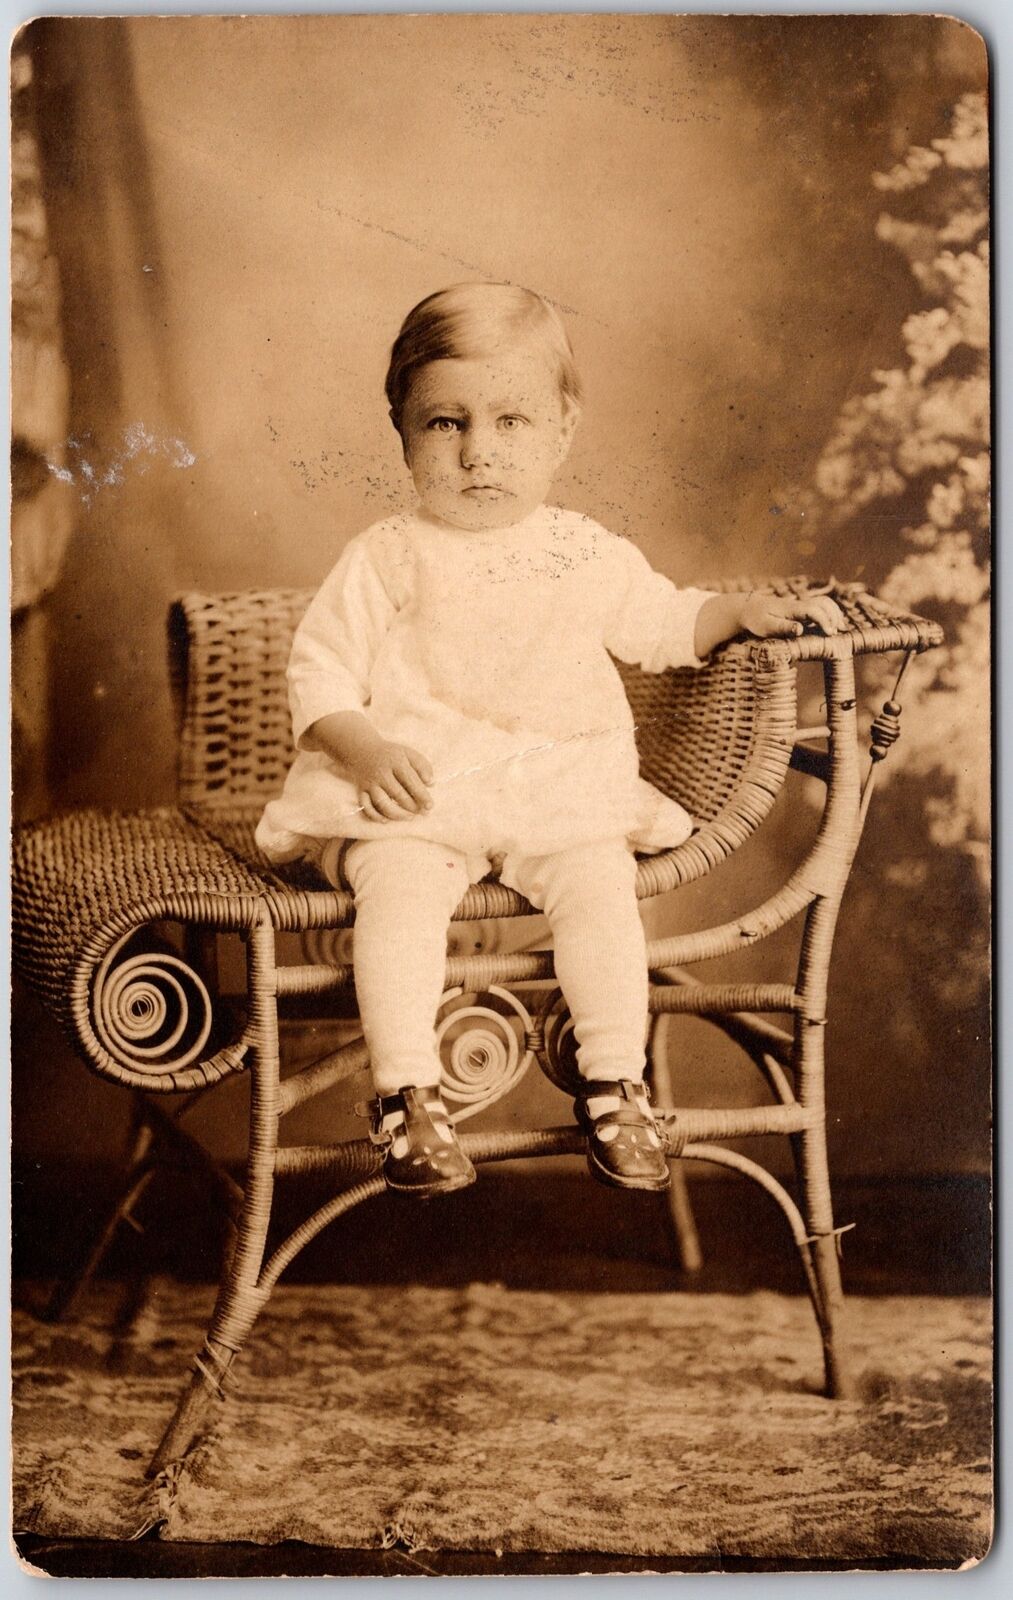 Infant Baby Child Photograph White Dress on Rattan Chair Postcard